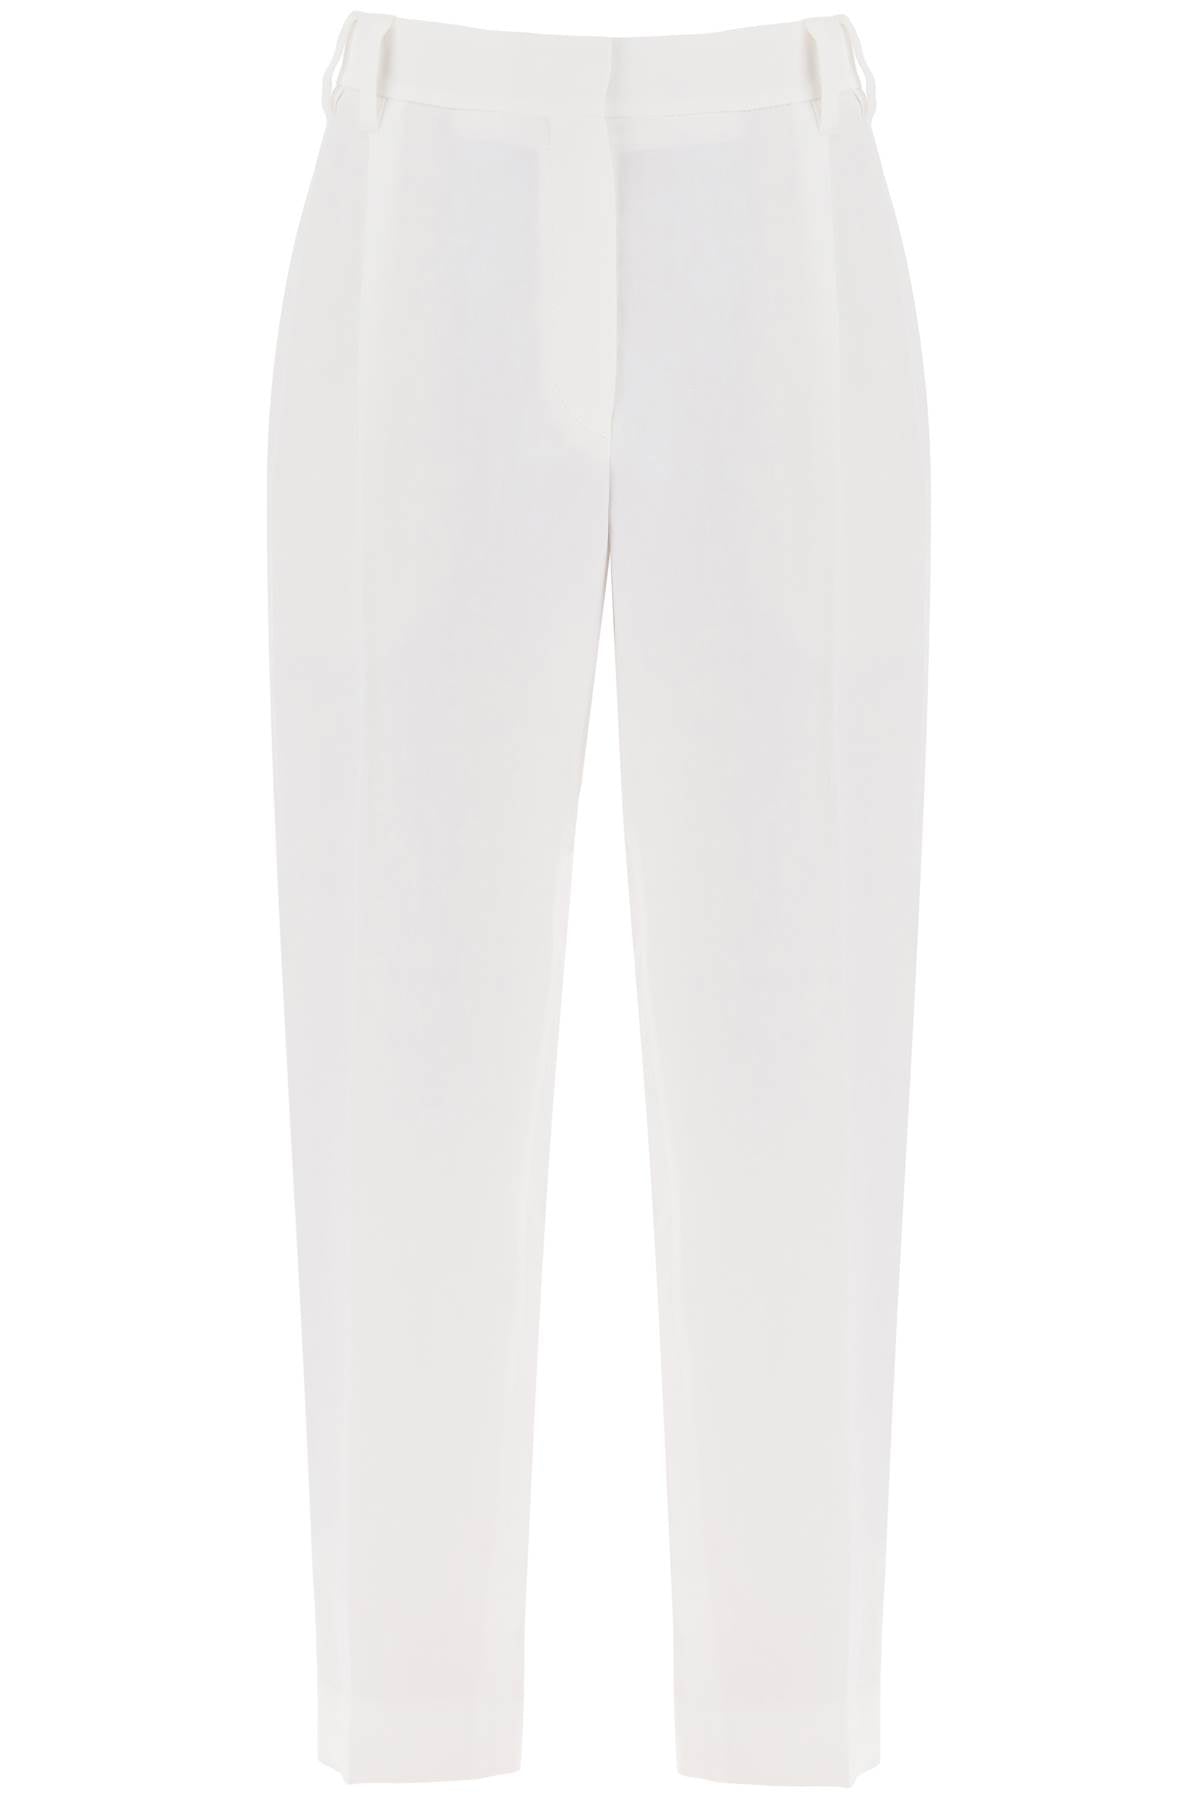 Brunello cucinelli tapered pants with ple MH126P8292 NATURALE